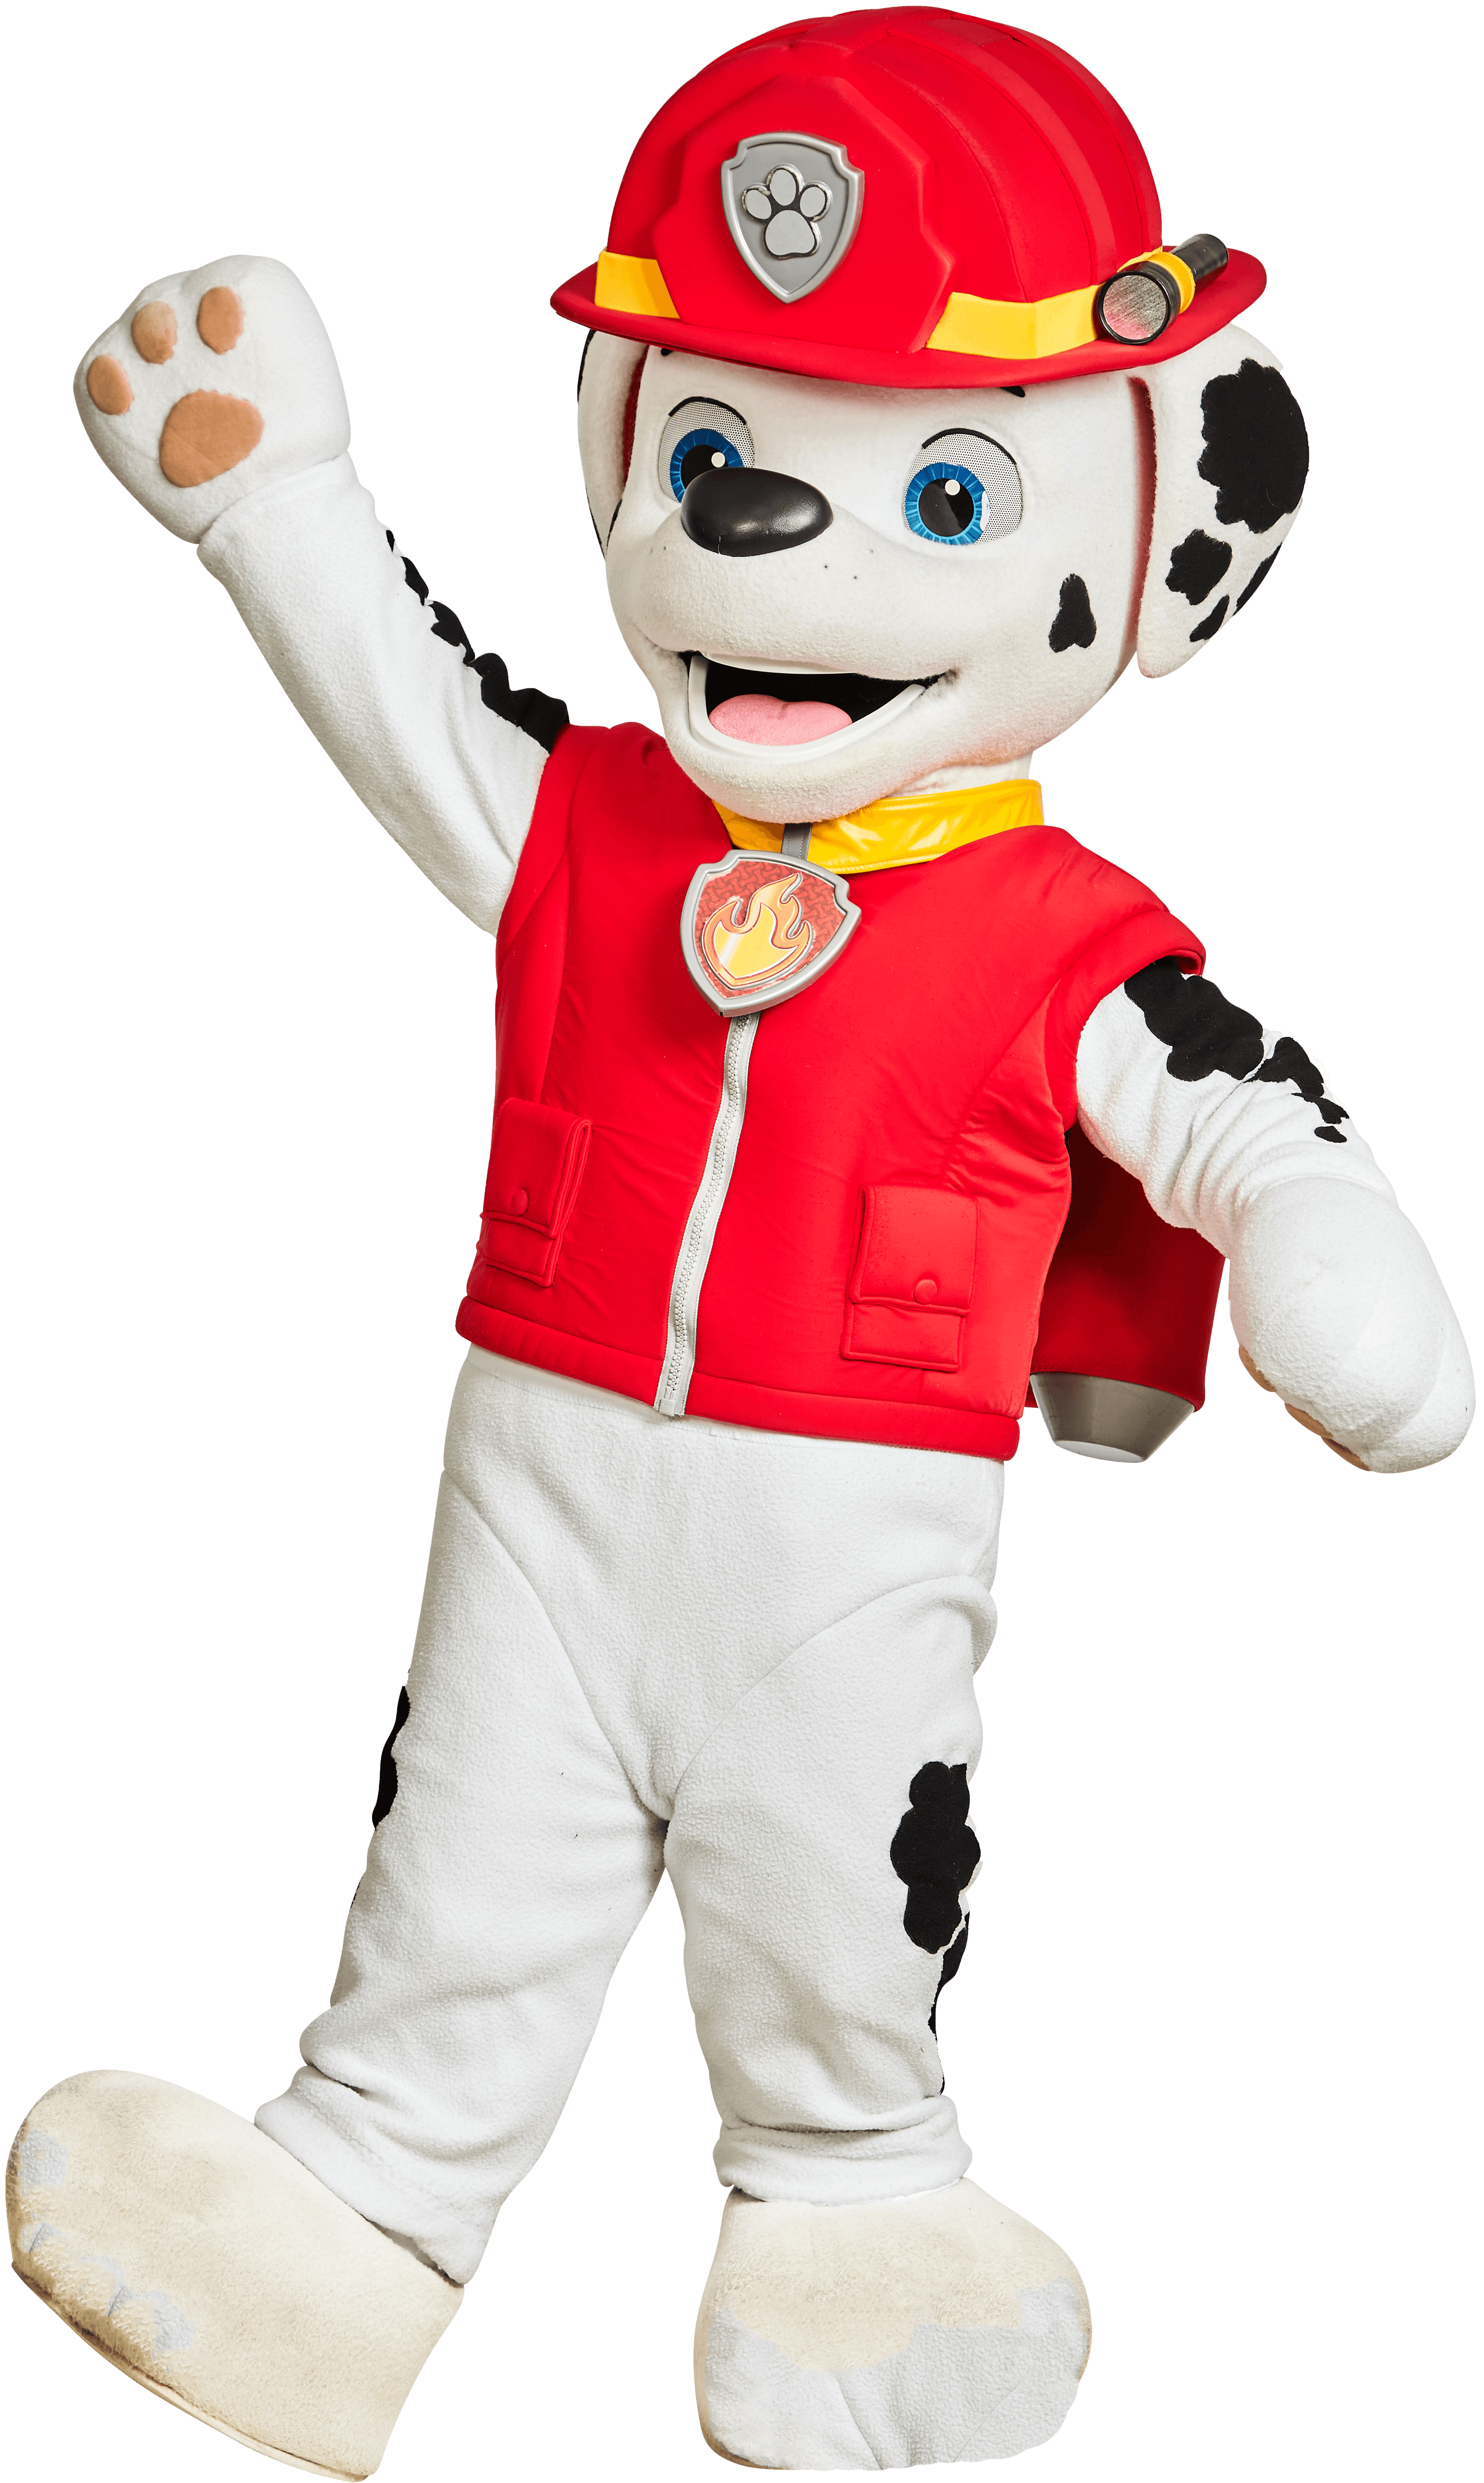 Marshall-paw-patrol-show-event-happy-day-for-children-event